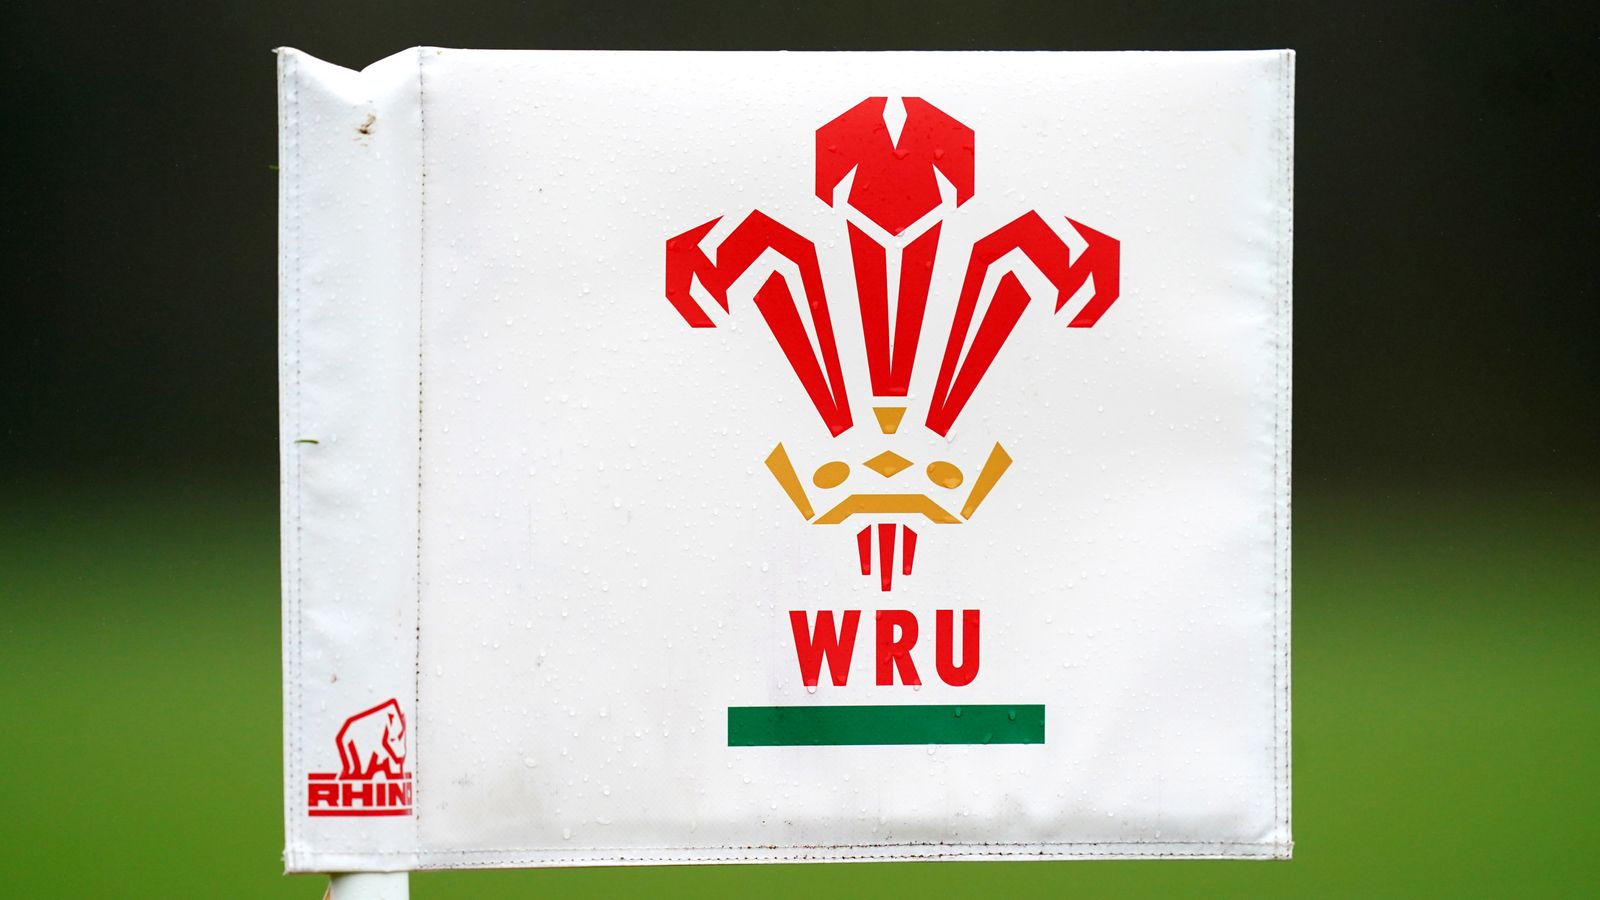 Welsh Rugby Union member clubs vote in favour of major governance reforms | Rugby Union News